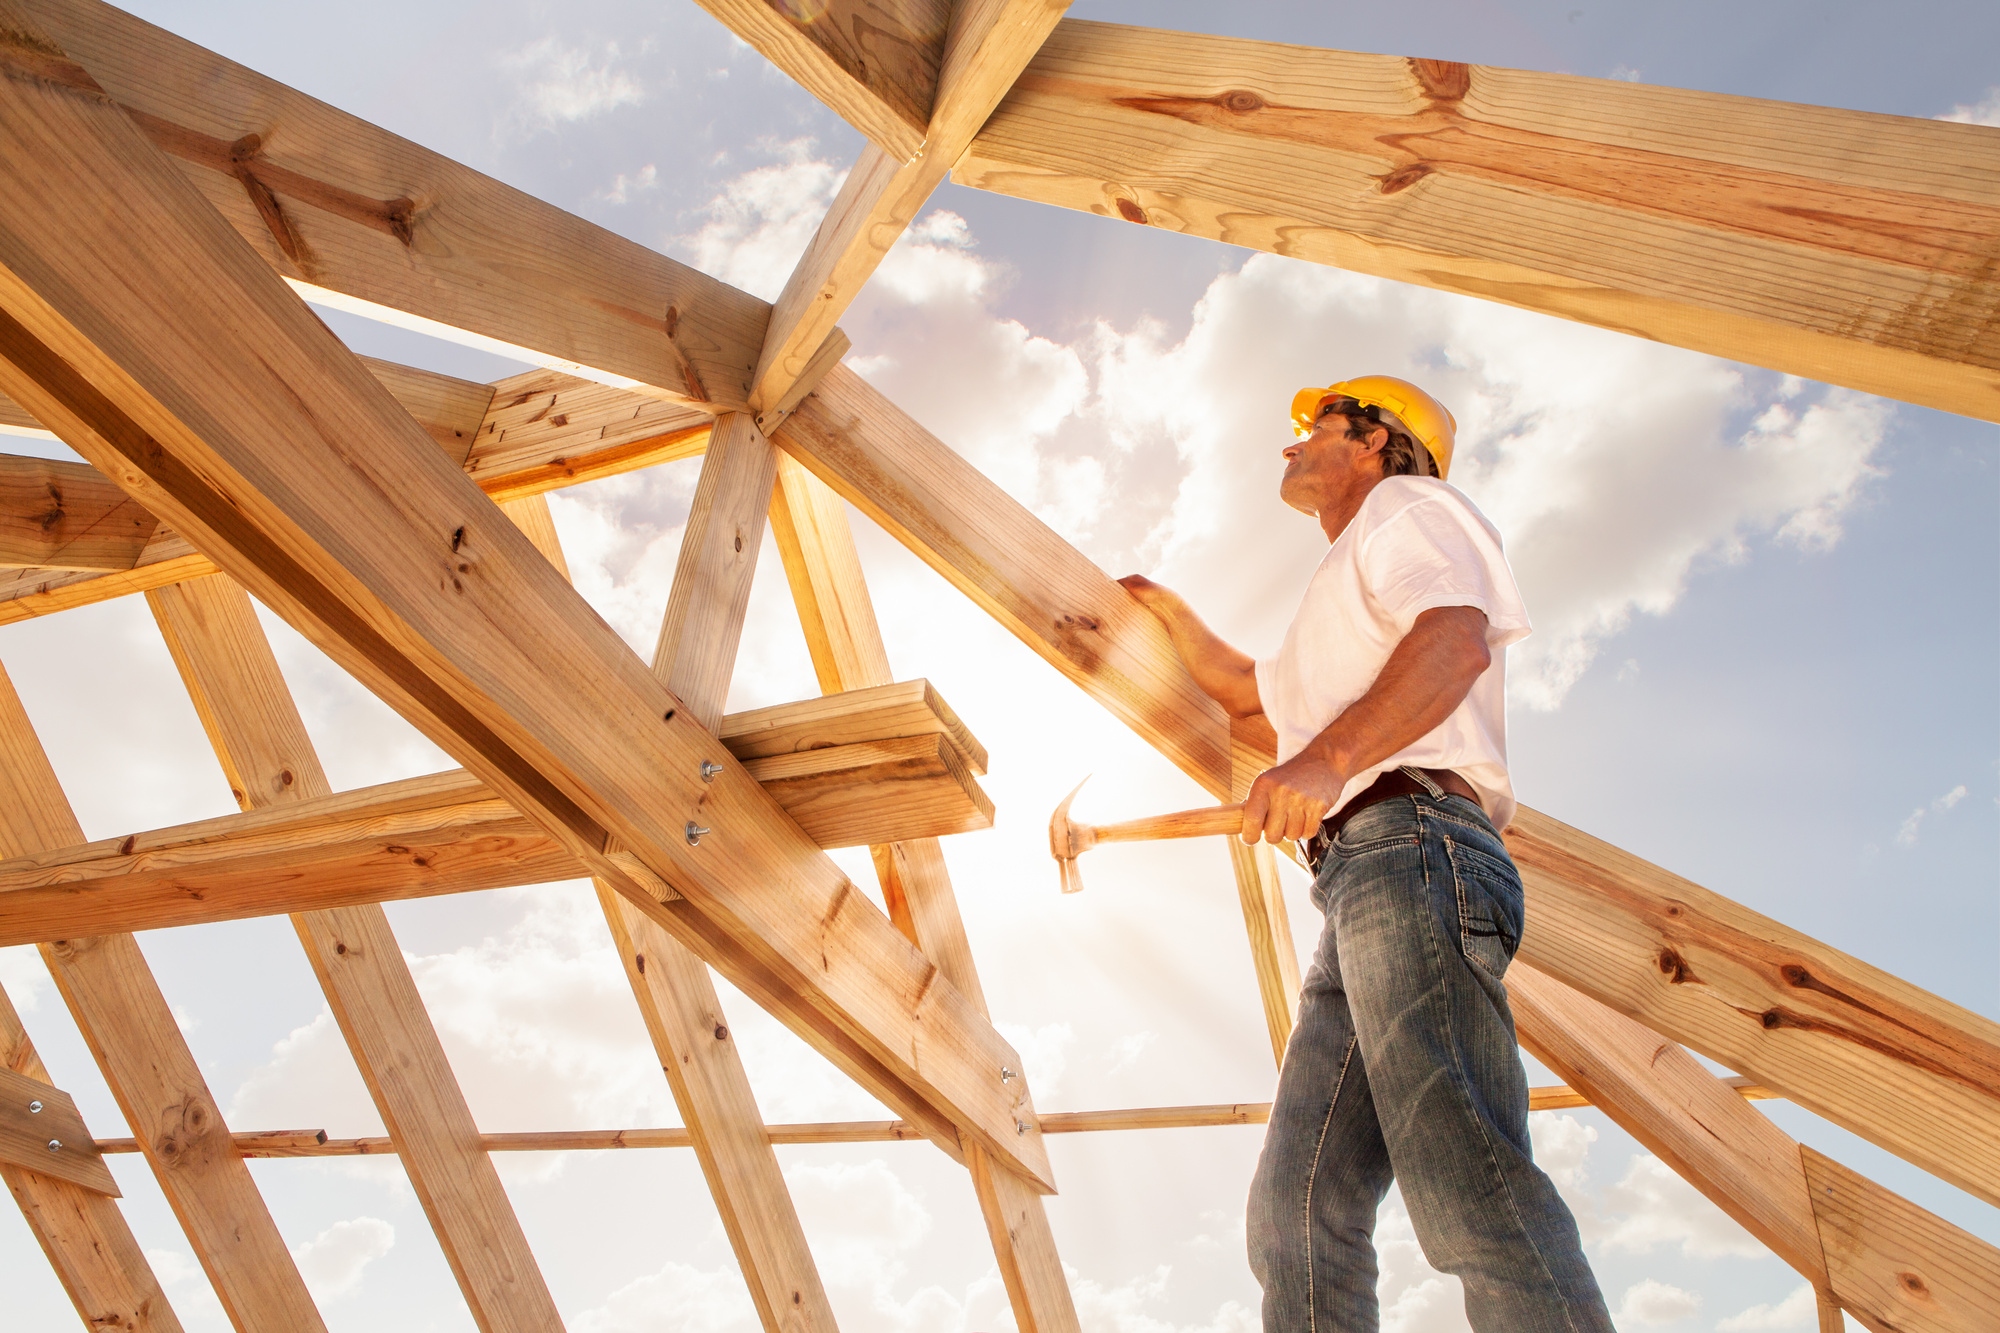 Building Your Dream Home? Here's What to Look for In a Home Builder